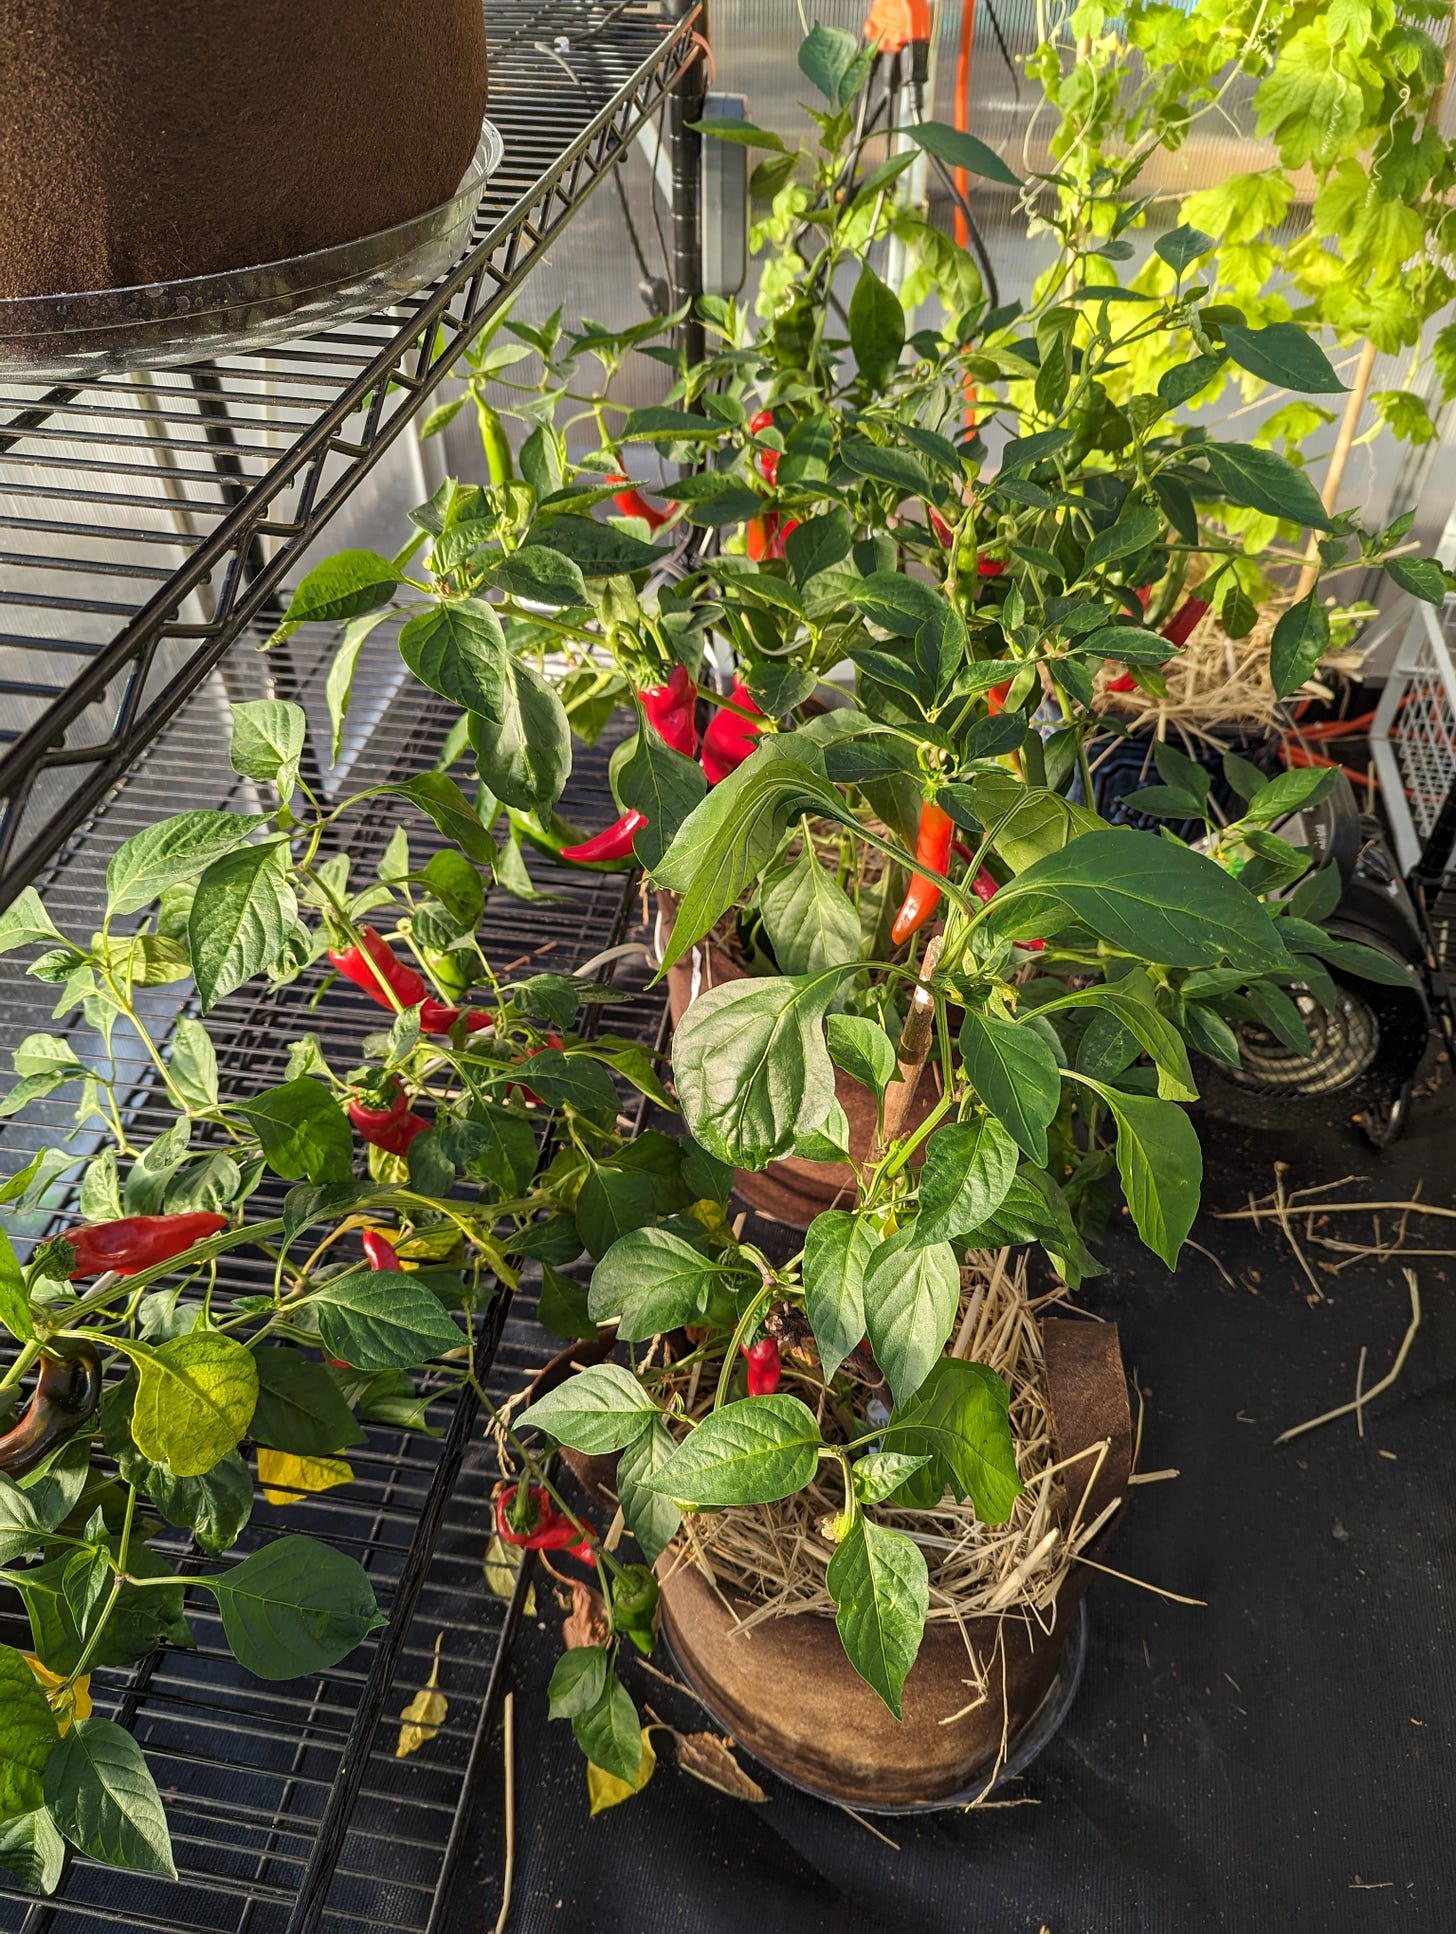 red peppers on large pepper plants in pots